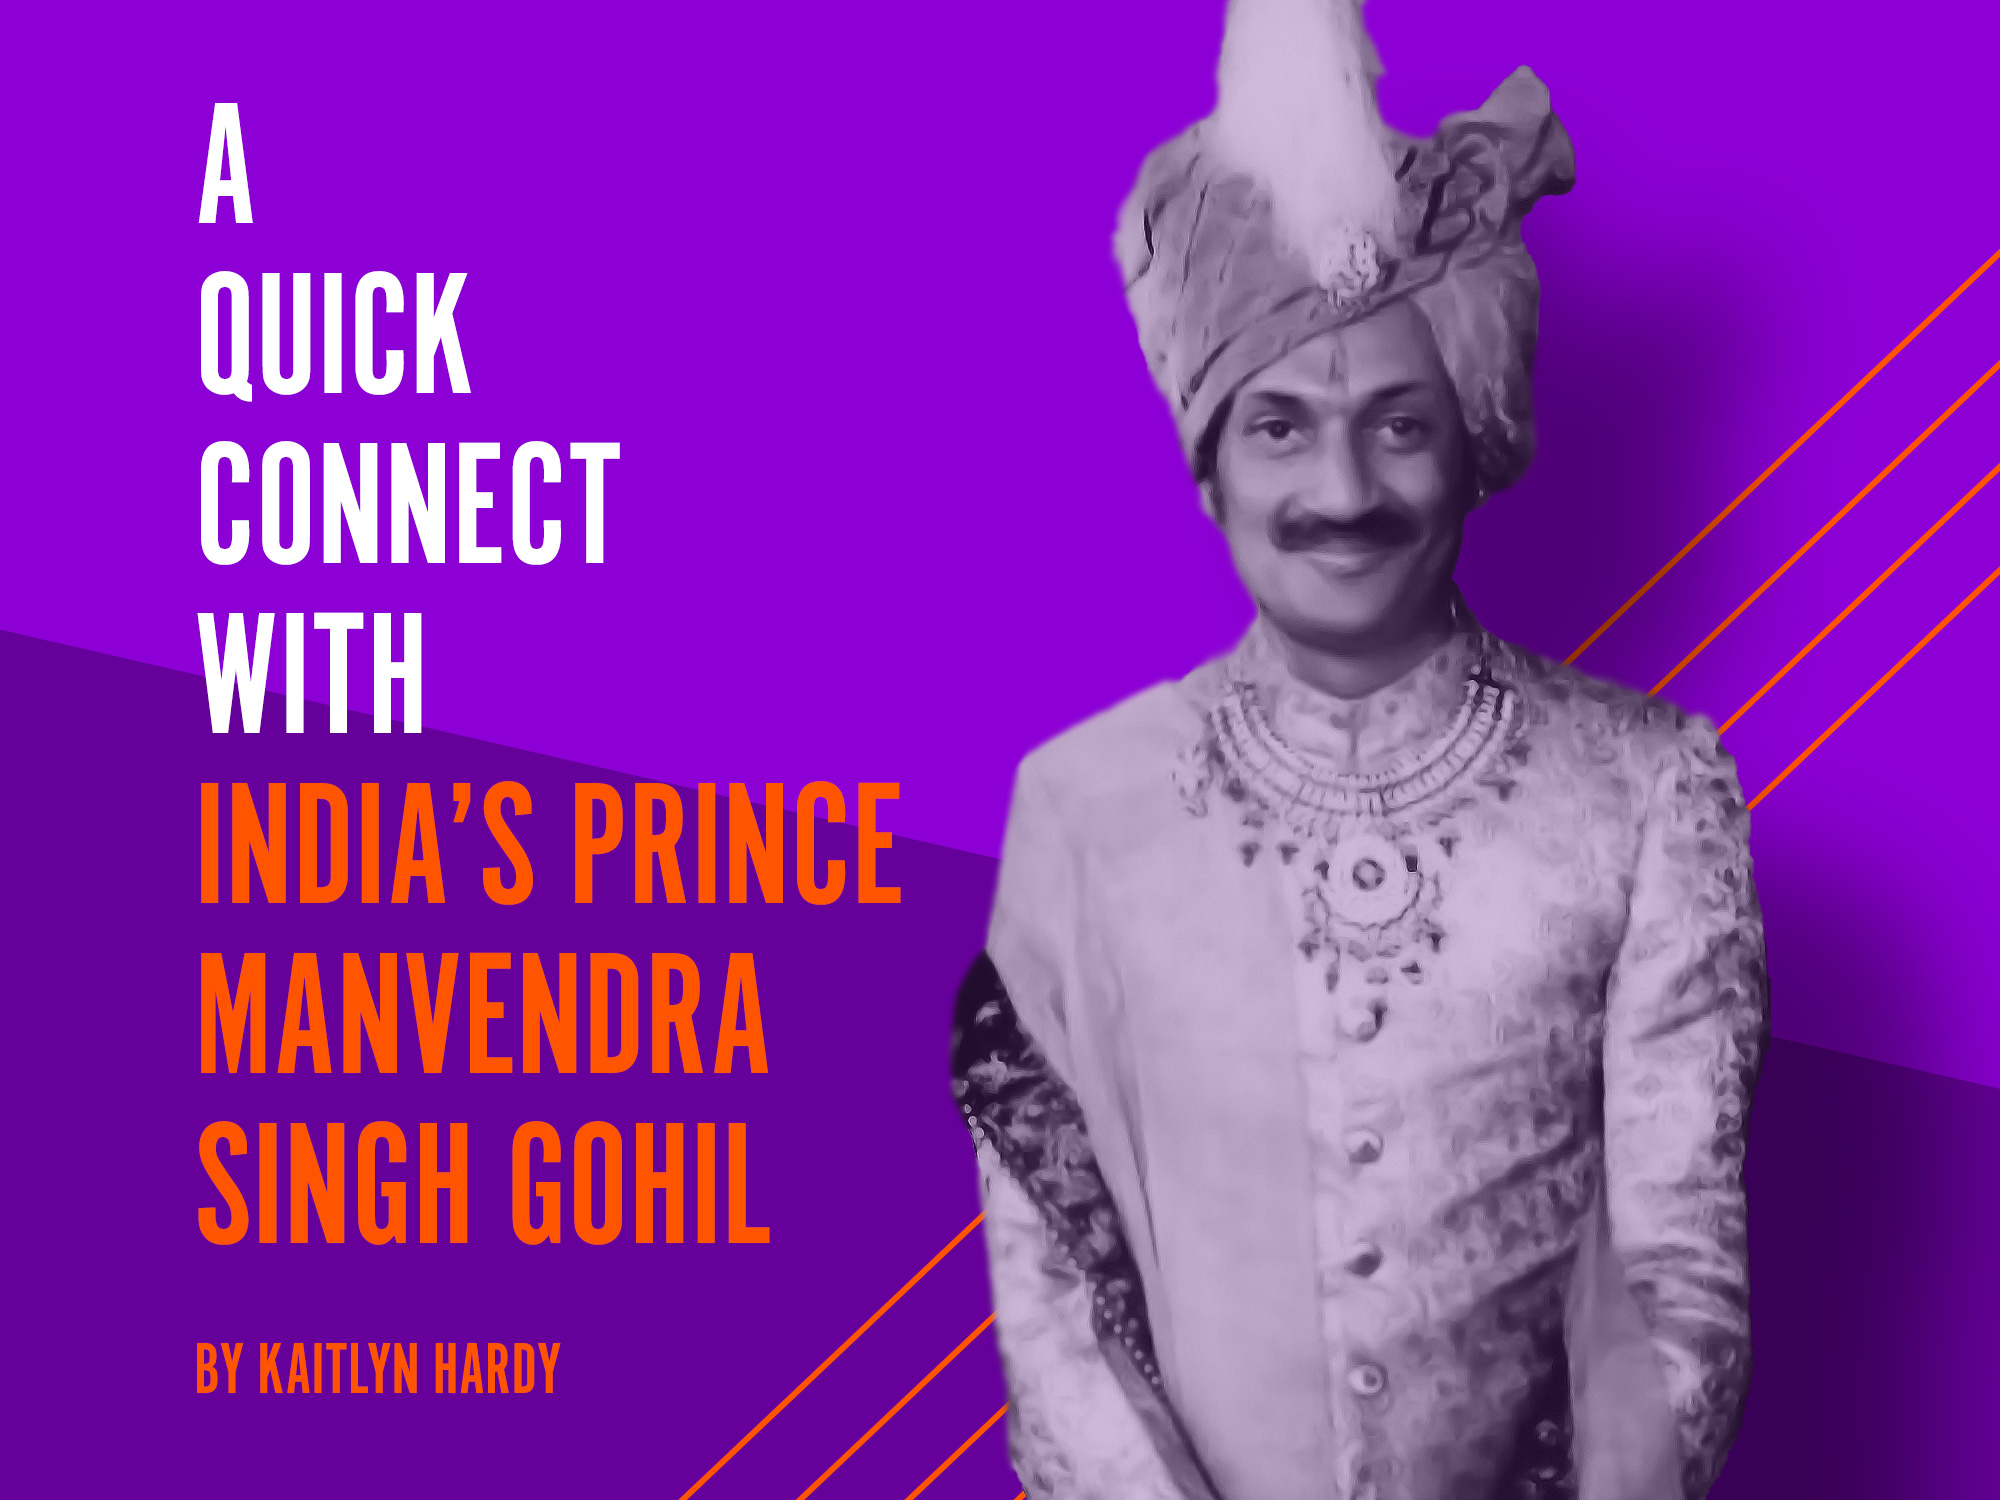 A Quick Connect with India’s Prince Manvendra Singh Gohil